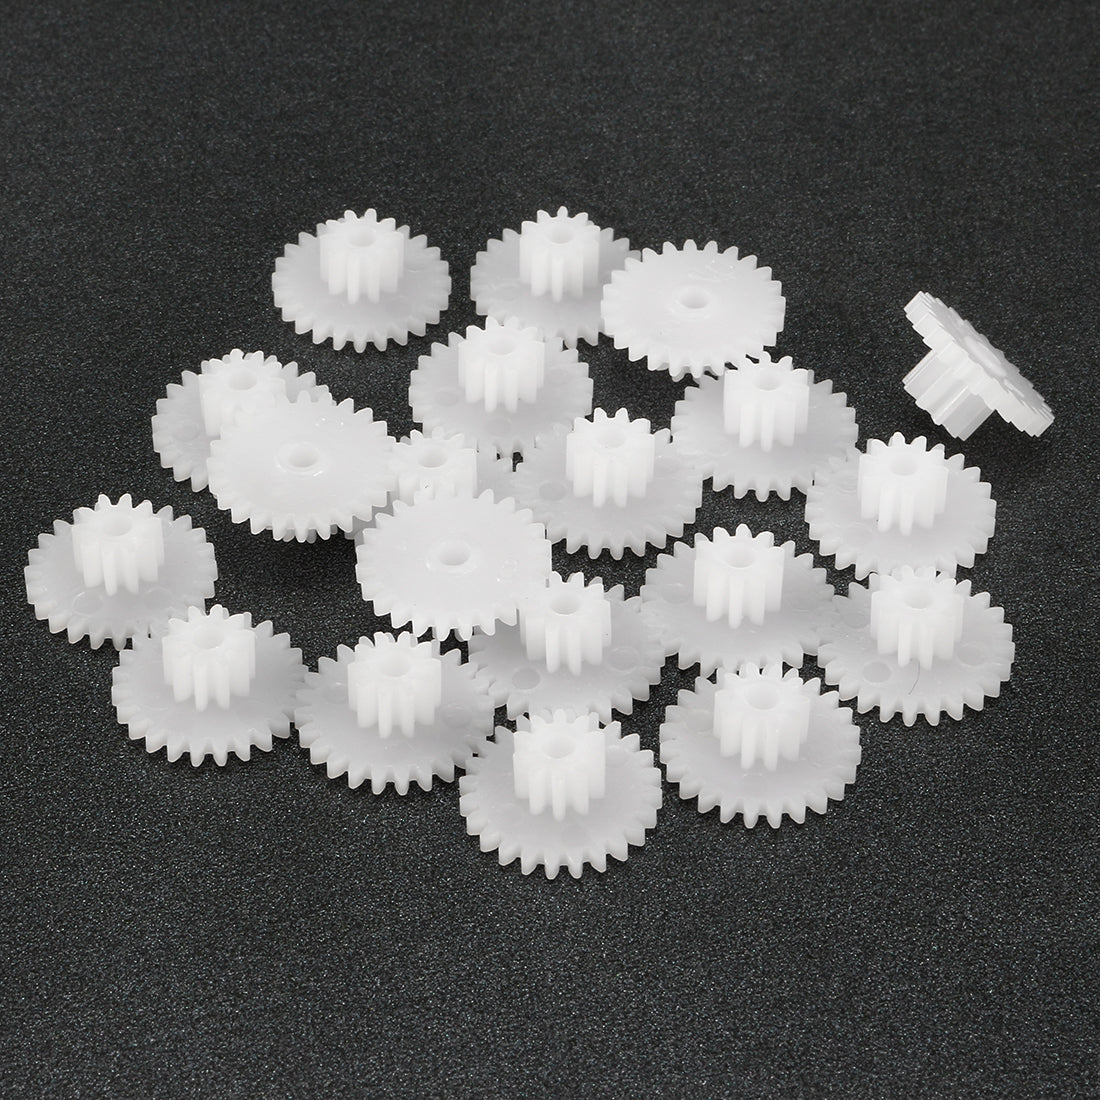 uxcell Uxcell 20Pcs 24102B Plastic Gear Accessories with 24 Teeth for DIY Car Robot Motor